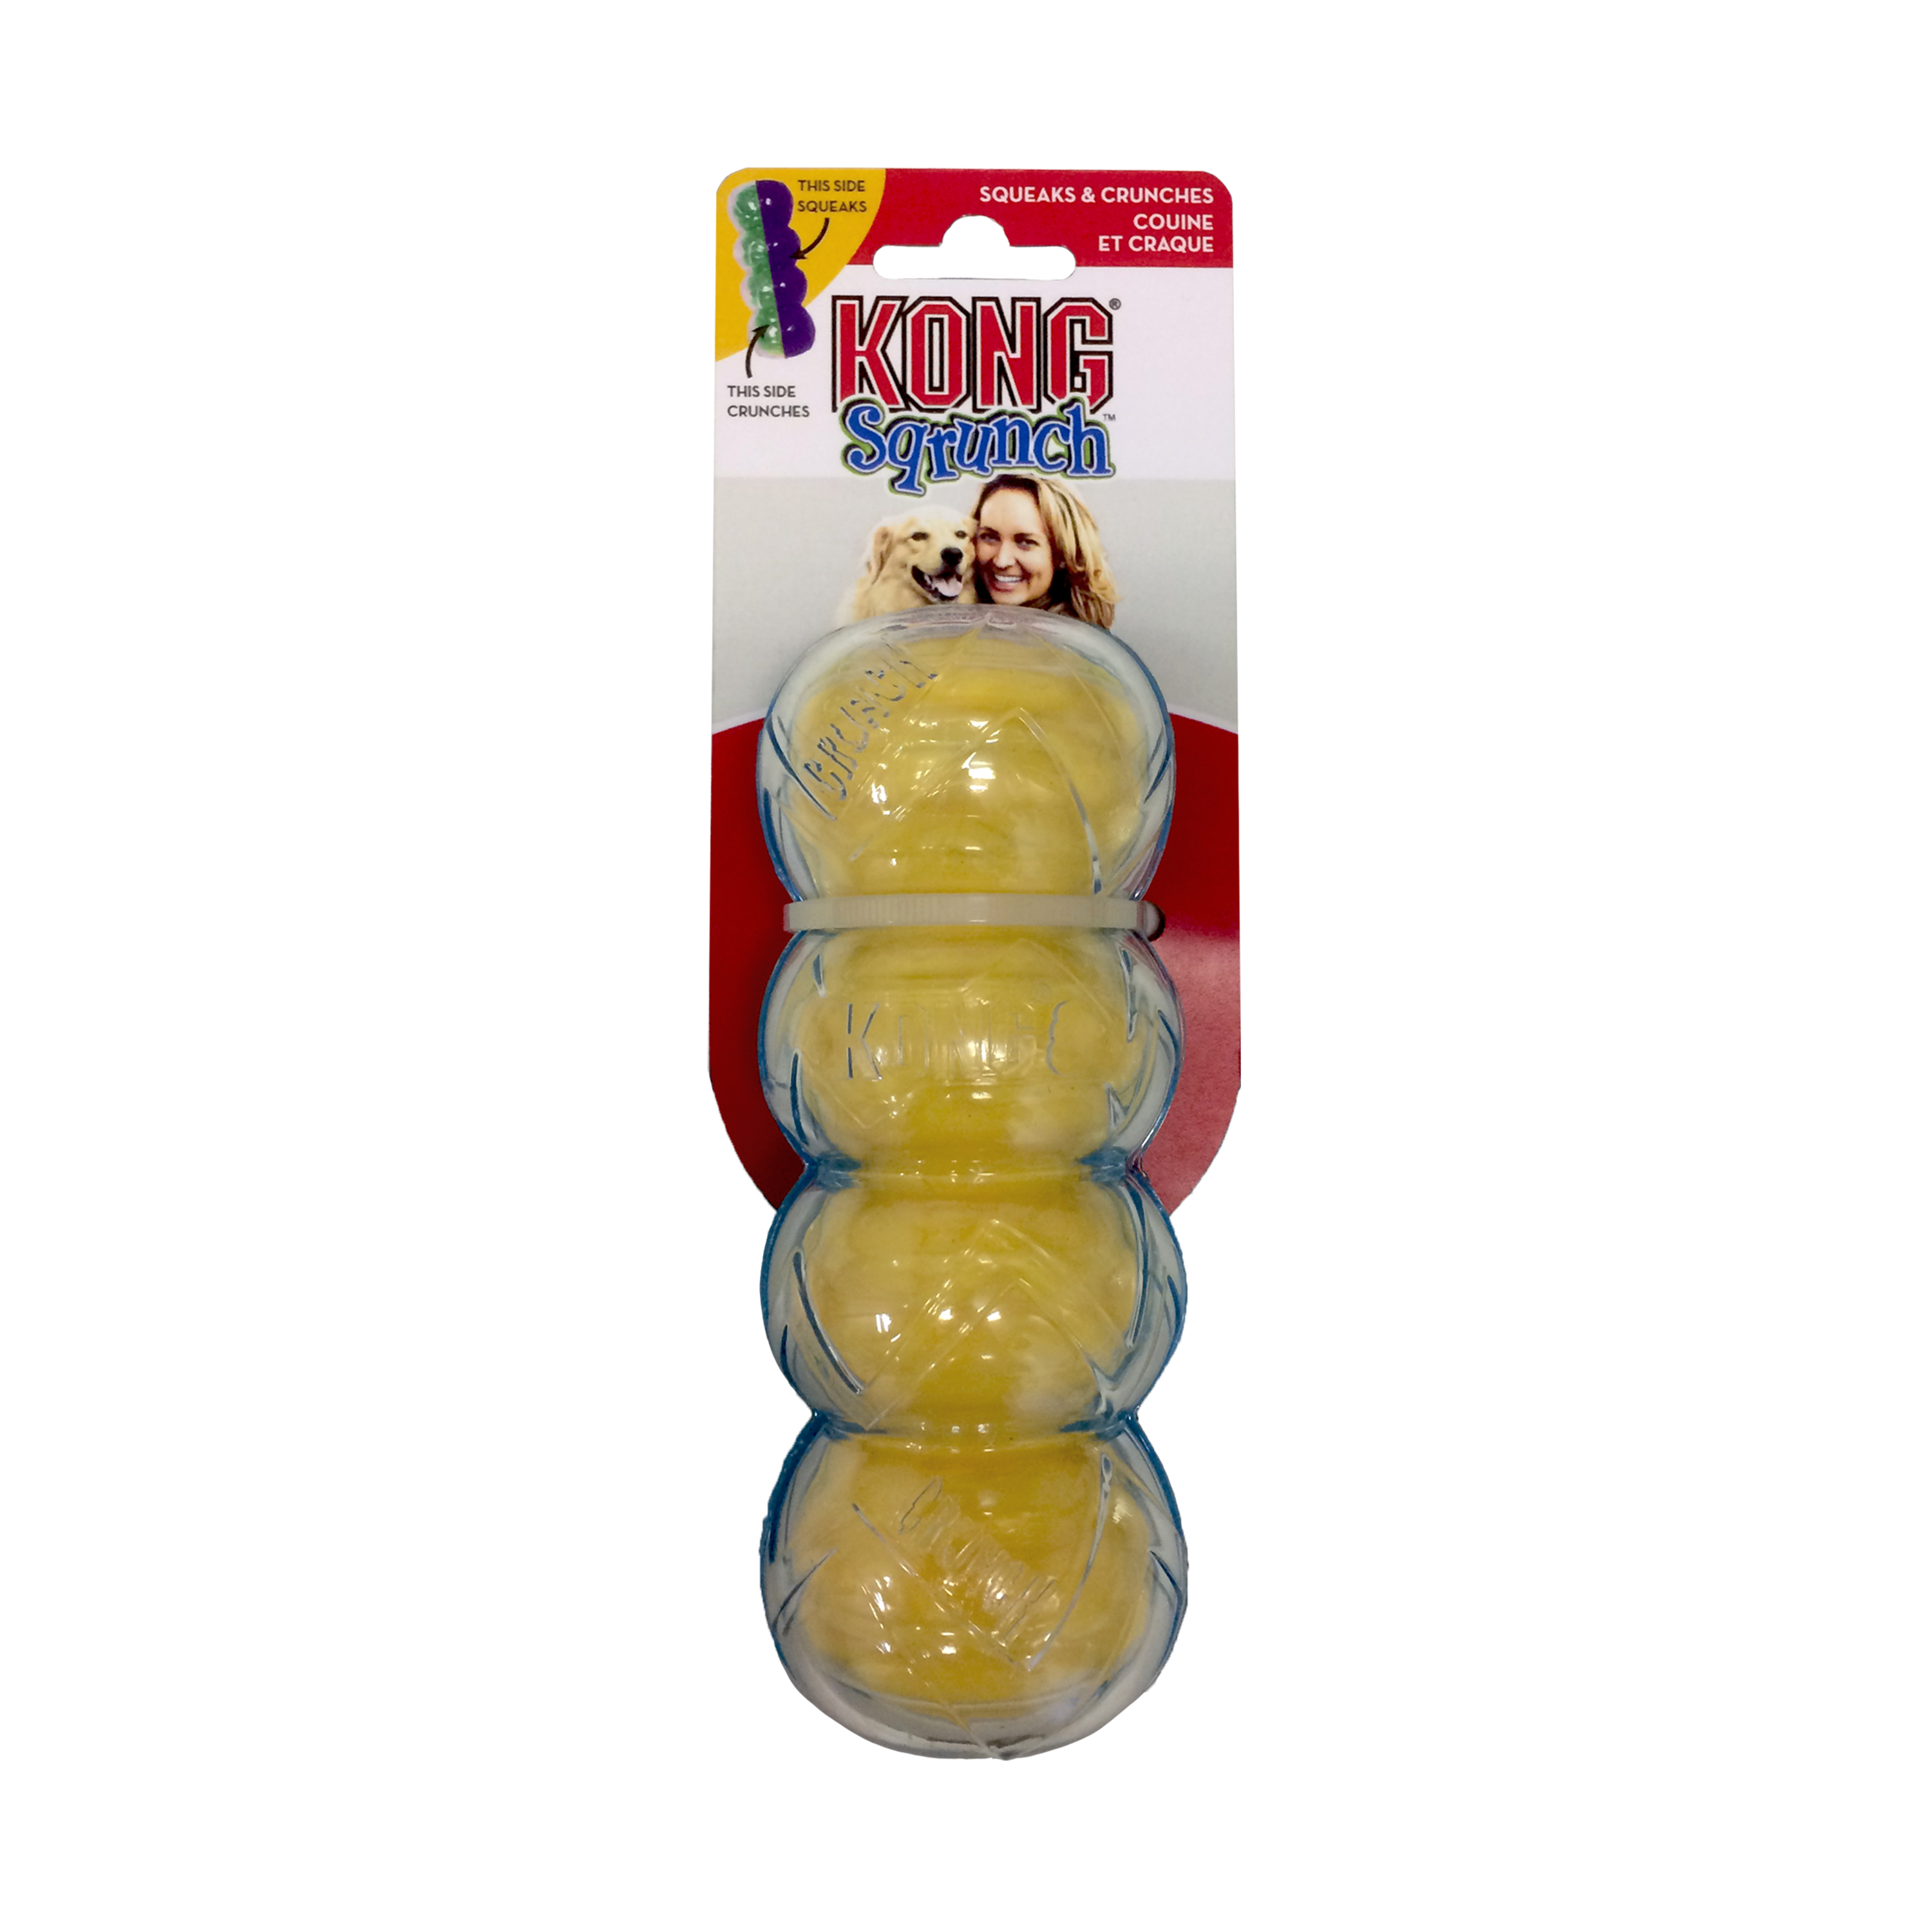 Kong Sqrunch Dumbbell Dog Toy